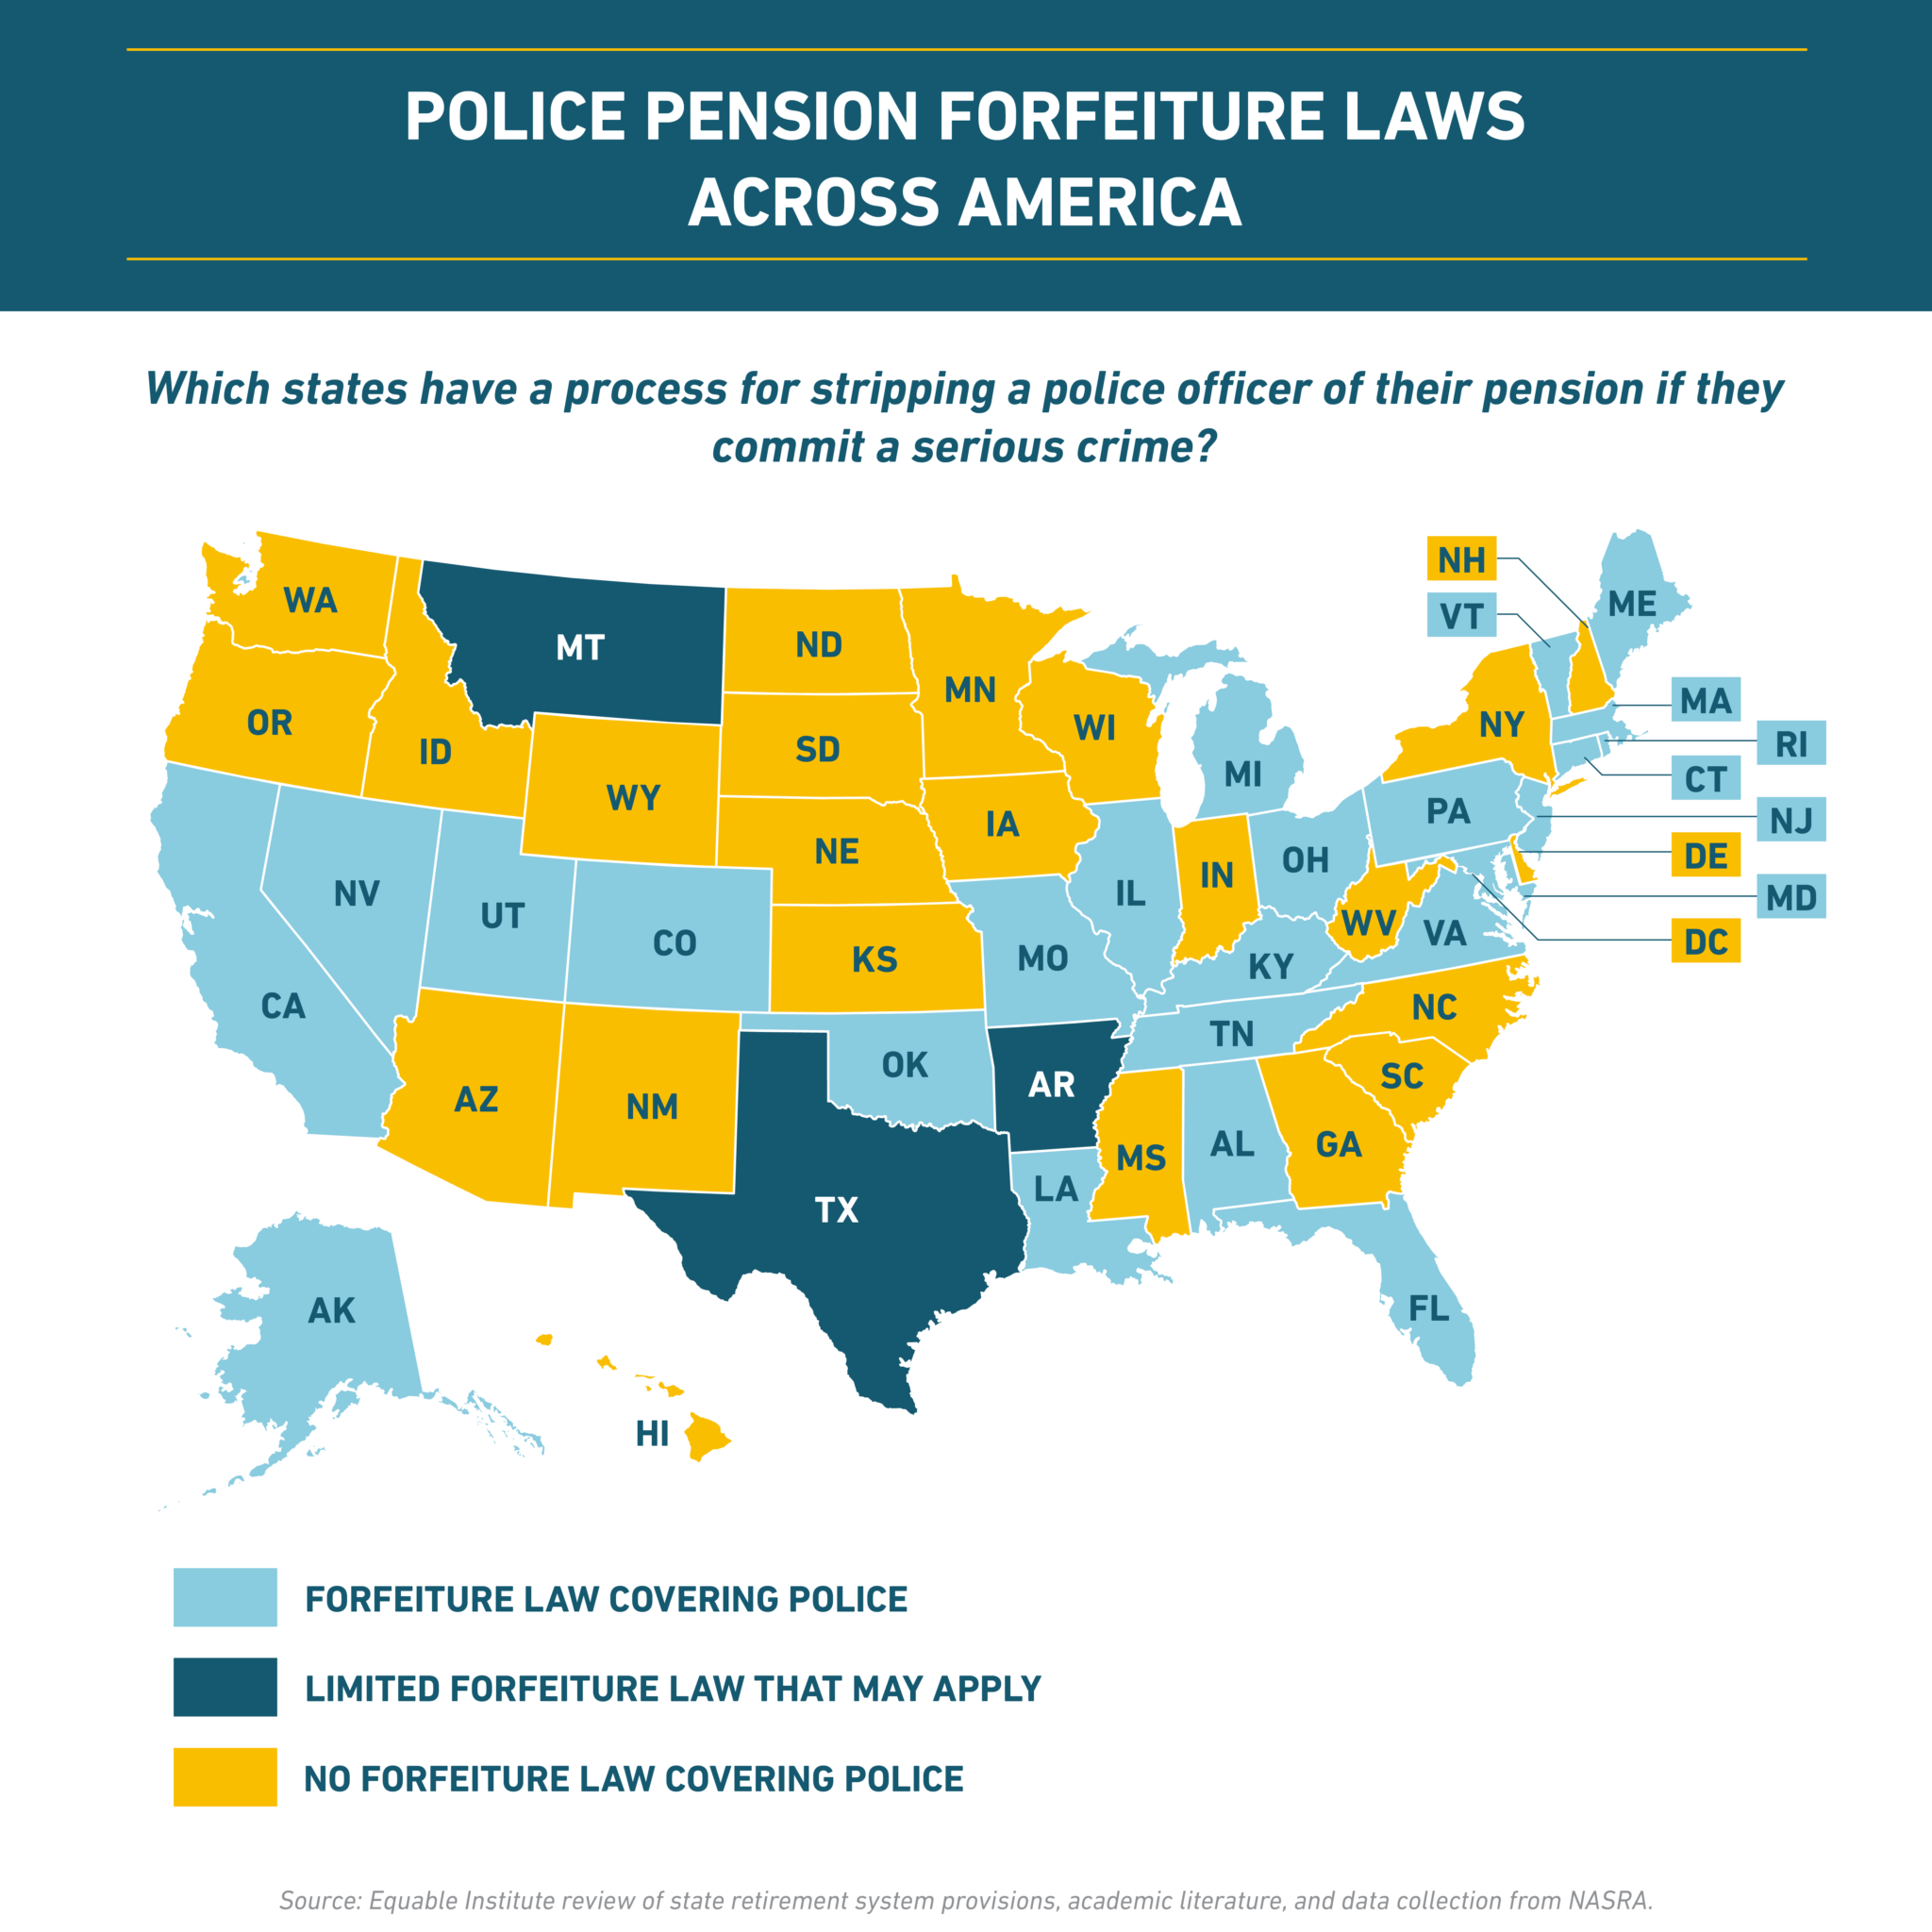 Which States Have Laws that Allow for Police Pension Forfeiture?